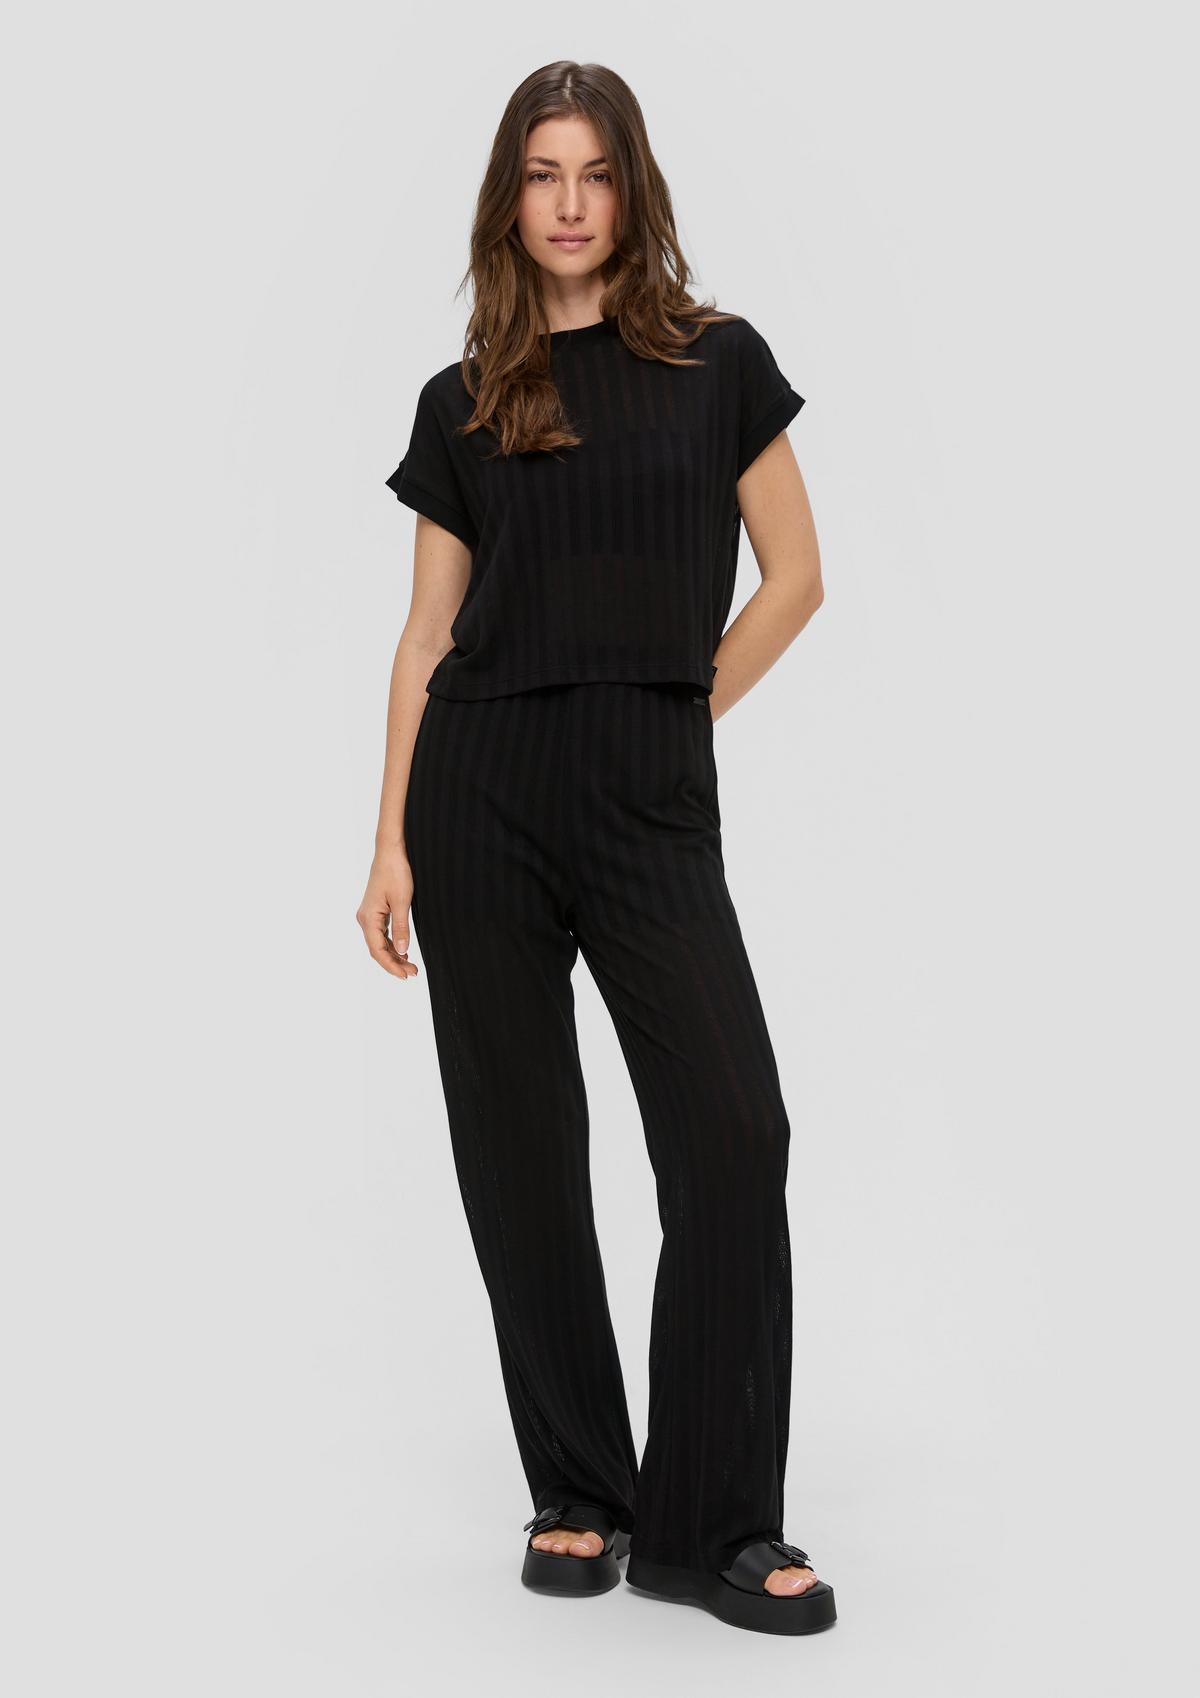 s.Oliver Regular fit: semi-sheer trousers with a textured pattern